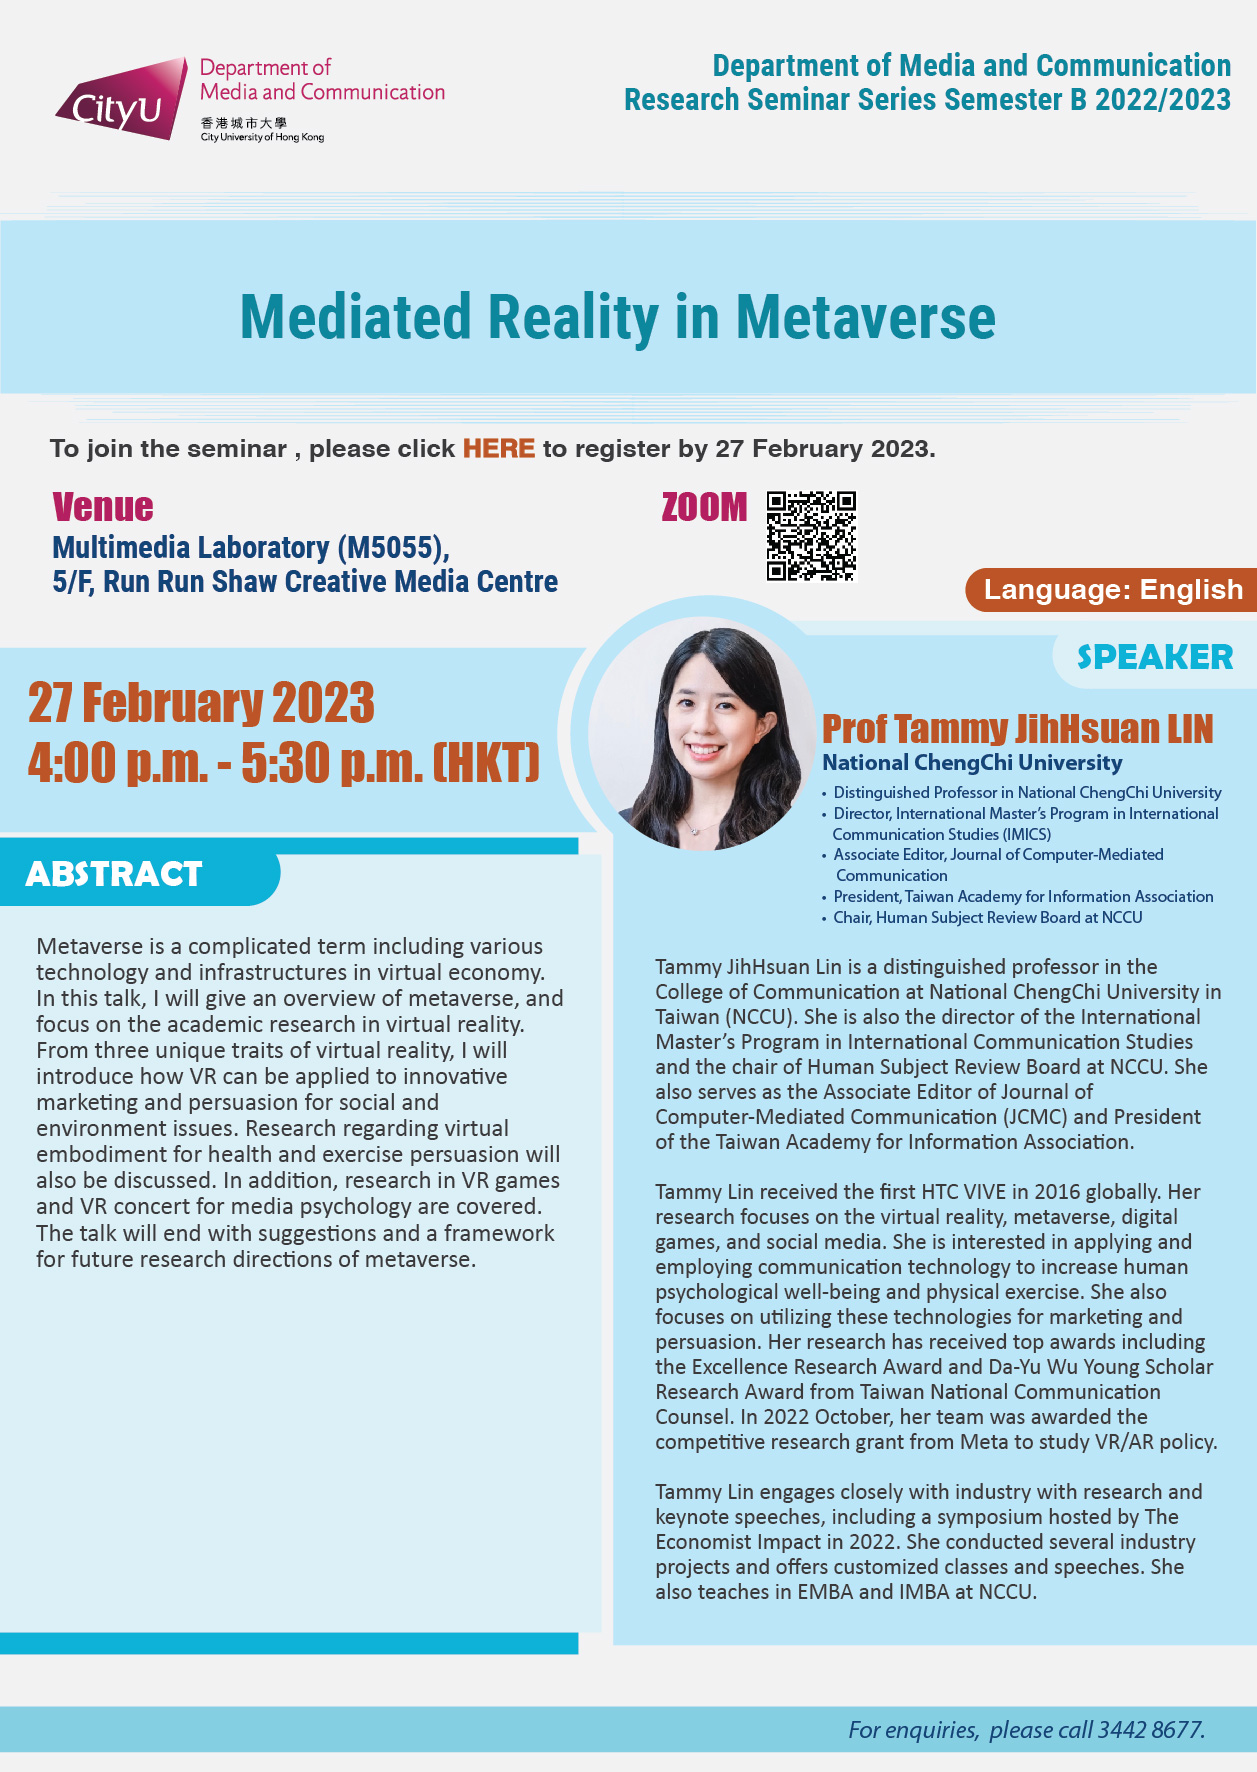 COM Research Seminar: COM Research Seminar: Mediated Reality in Metaverse by Prof Tammy JihHsuan LIN, National ChengChi University, Distinguished Professor in National ChengChi University; Director, International Master’s Program in International Communication Studies (IMICS); Associate Editor, Journal of Computer-Mediated Communication; President, Taiwan Academy for Information Association; Chair, Human Subject Review Board at NCCU Date & Time: 27 February 2023, 16:00 - 17:30. Venue: Multimedia Laboratory (M5055),5/F, Run Run Shaw Creative Media Centre. Language: English. Abstract Metaverse is a complicated term including various technology and infrastructures in virtual economy. In this talk, I will give an overview of metaverse, and focus on the academic research in virtual reality. From three unique traits of virtual reality, I will introduce how VR can be applied to innovative marketing and persuasion for social and environment issues. Research regarding virtual embodiment for health and exercise persuasion will also be discussed. In addition, research in VR games and VR concert for media psychology are covered. The talk will end with suggestions and a framework for future research directions of metaverse. About the speaker: Tammy JihHsuan Lin is a distinguished professor in the College of Communication at National ChengChi University in Taiwan (NCCU). She is also the director of the International Master’s Program in International Communication Studies and the chair of Human Subject Review Board at NCCU. She also serves as the Associate Editor of Journal of Computer-Mediated Communication (JCMC) and President of the Taiwan Academy for Information Association.Tammy Lin received the first HTC VIVE in 2016 globally. Her research focuses on the virtual reality, metaverse, digital games, and social media. She is interested in applying and employing communication technology to increase human psychological well-being and physical exercise. She also focuses on utilizing these technologies for marketing and persuasion. Her research has received top awards including the Excellence Research Award and Da-Yu Wu Young Scholar Research Award from Taiwan National Communication Counsel. In 2022 October, her team was awarded the competitive research grant from Meta to study VR/AR policy. Tammy Lin engages closely with industry with research and keynote speeches, including a symposium hosted by The Economist Impact in 2022. She conducted several industry projects and offers customized classes and speeches. She also teaches in EMBA and IMBA at NCCU. For enquiries, please call 34428677.